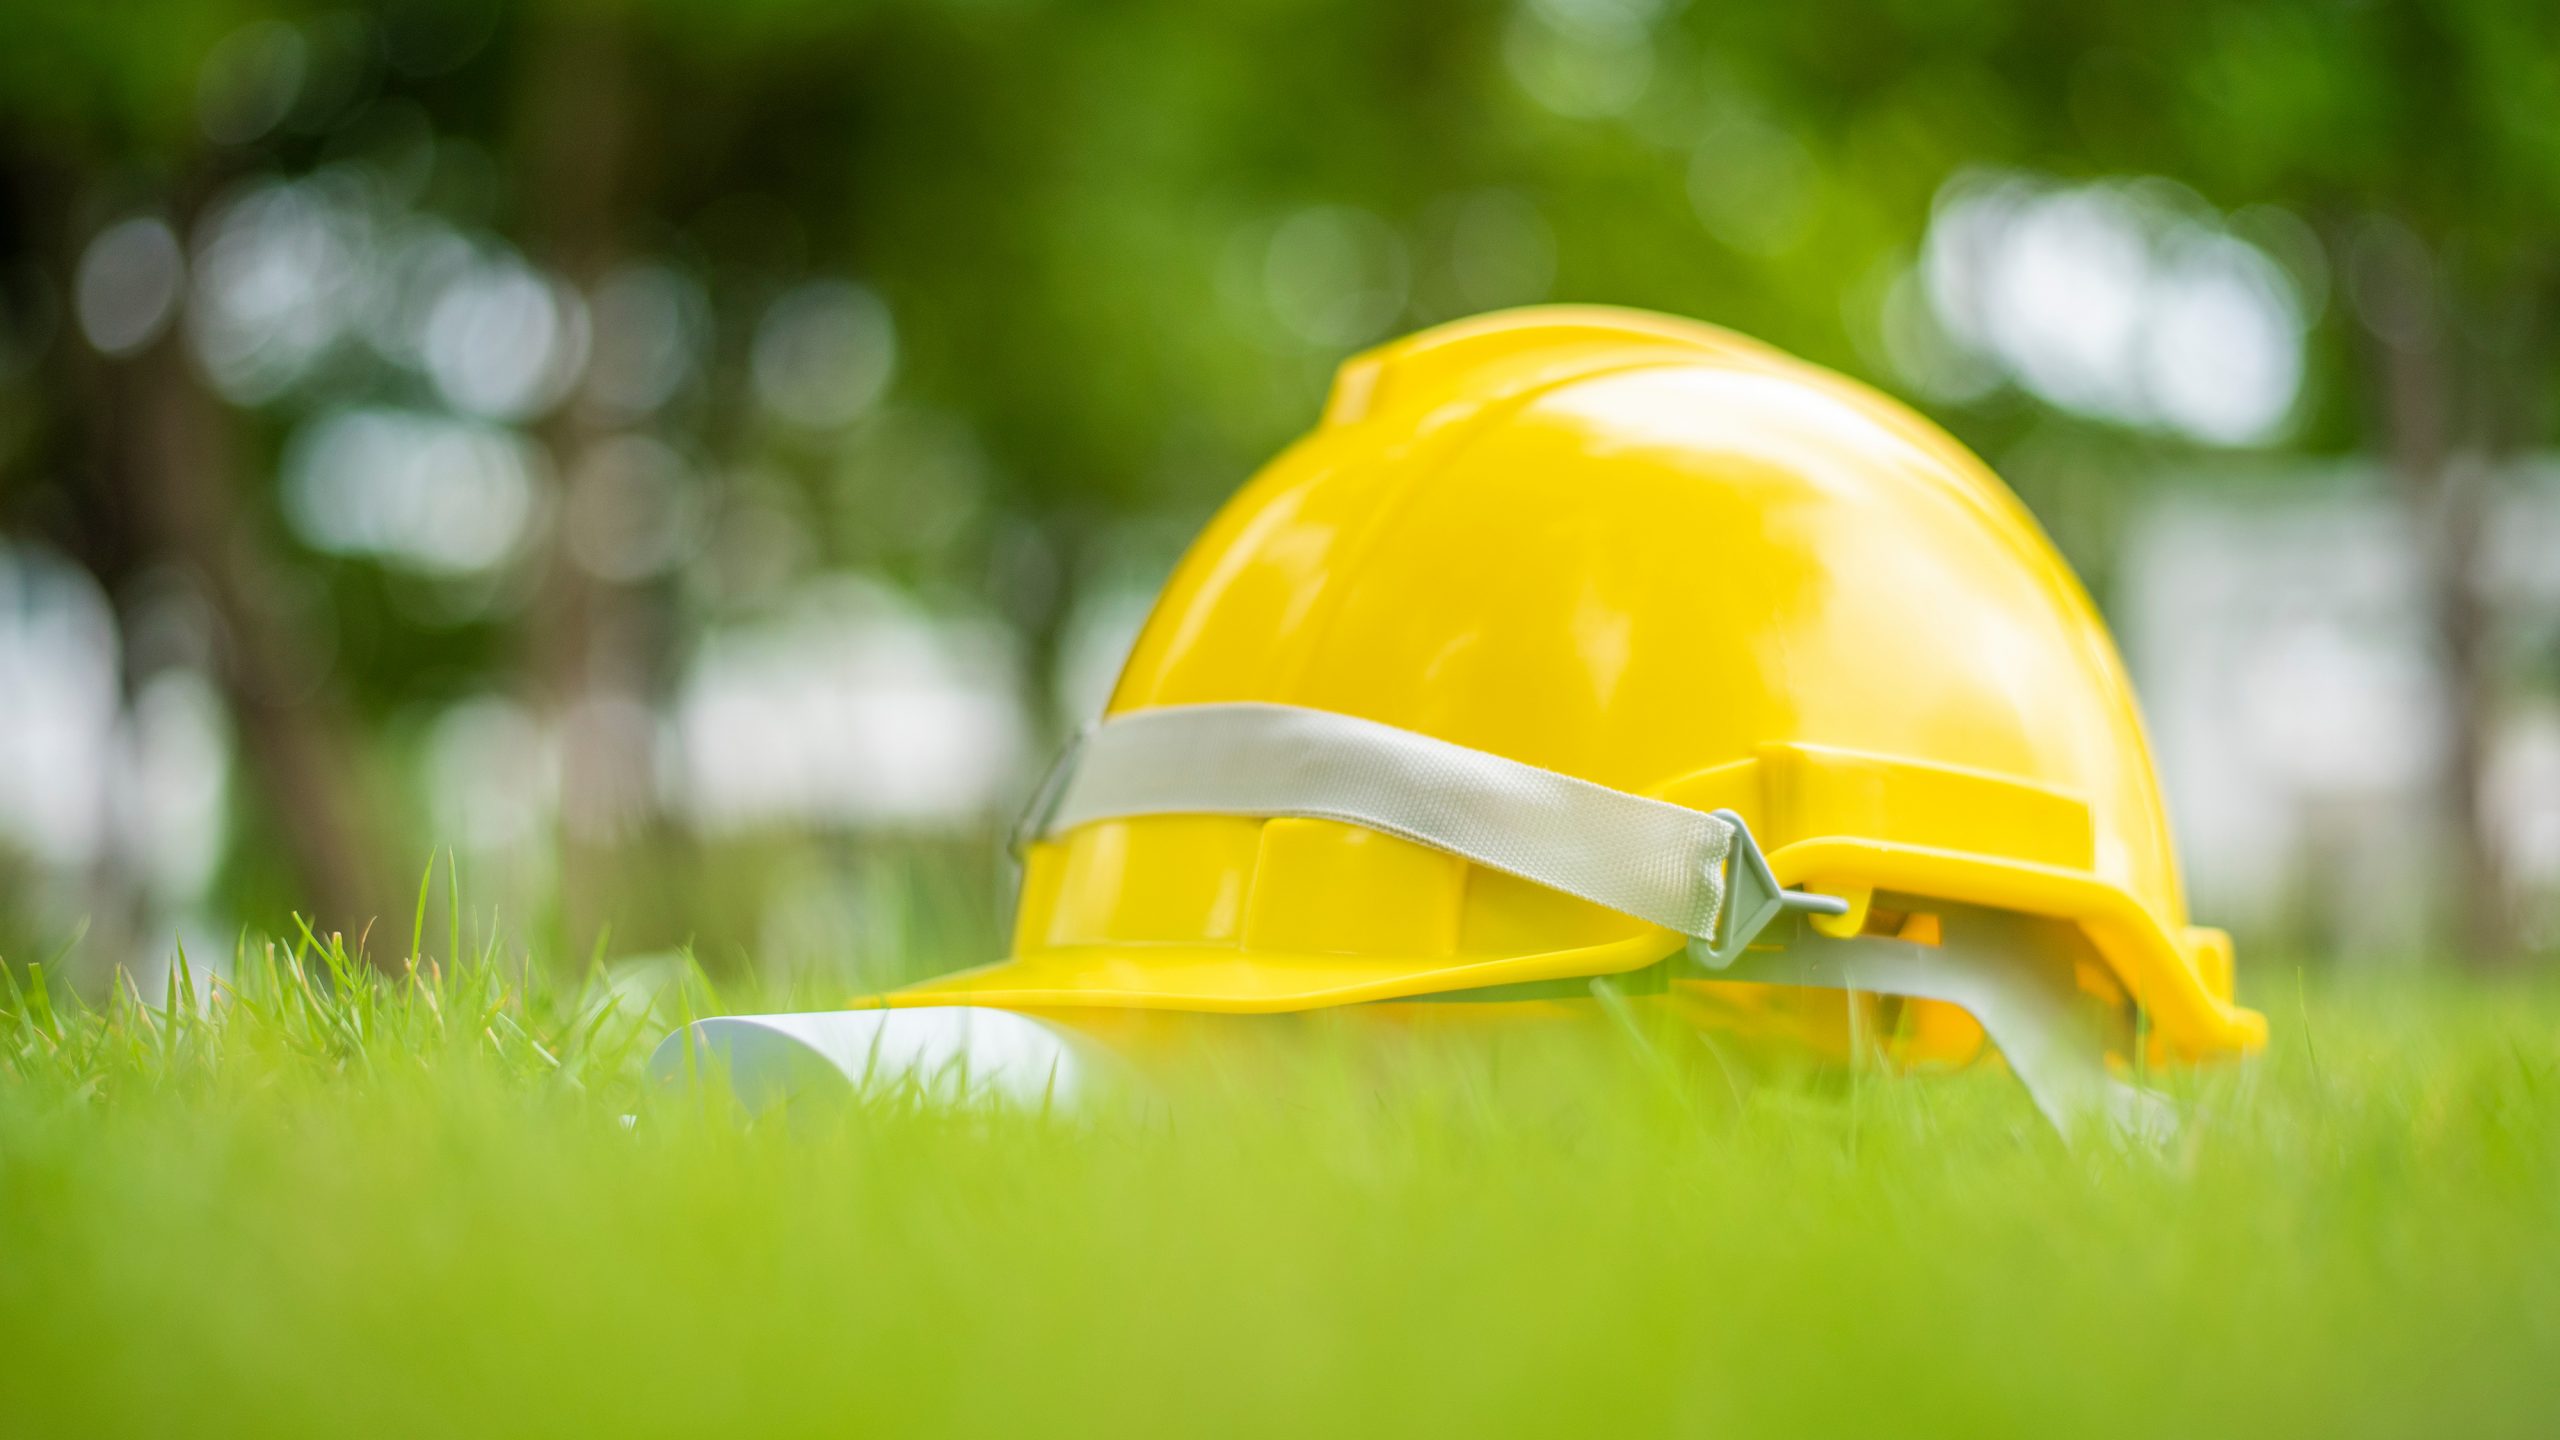 How project management can aid environmental sustainability in construction